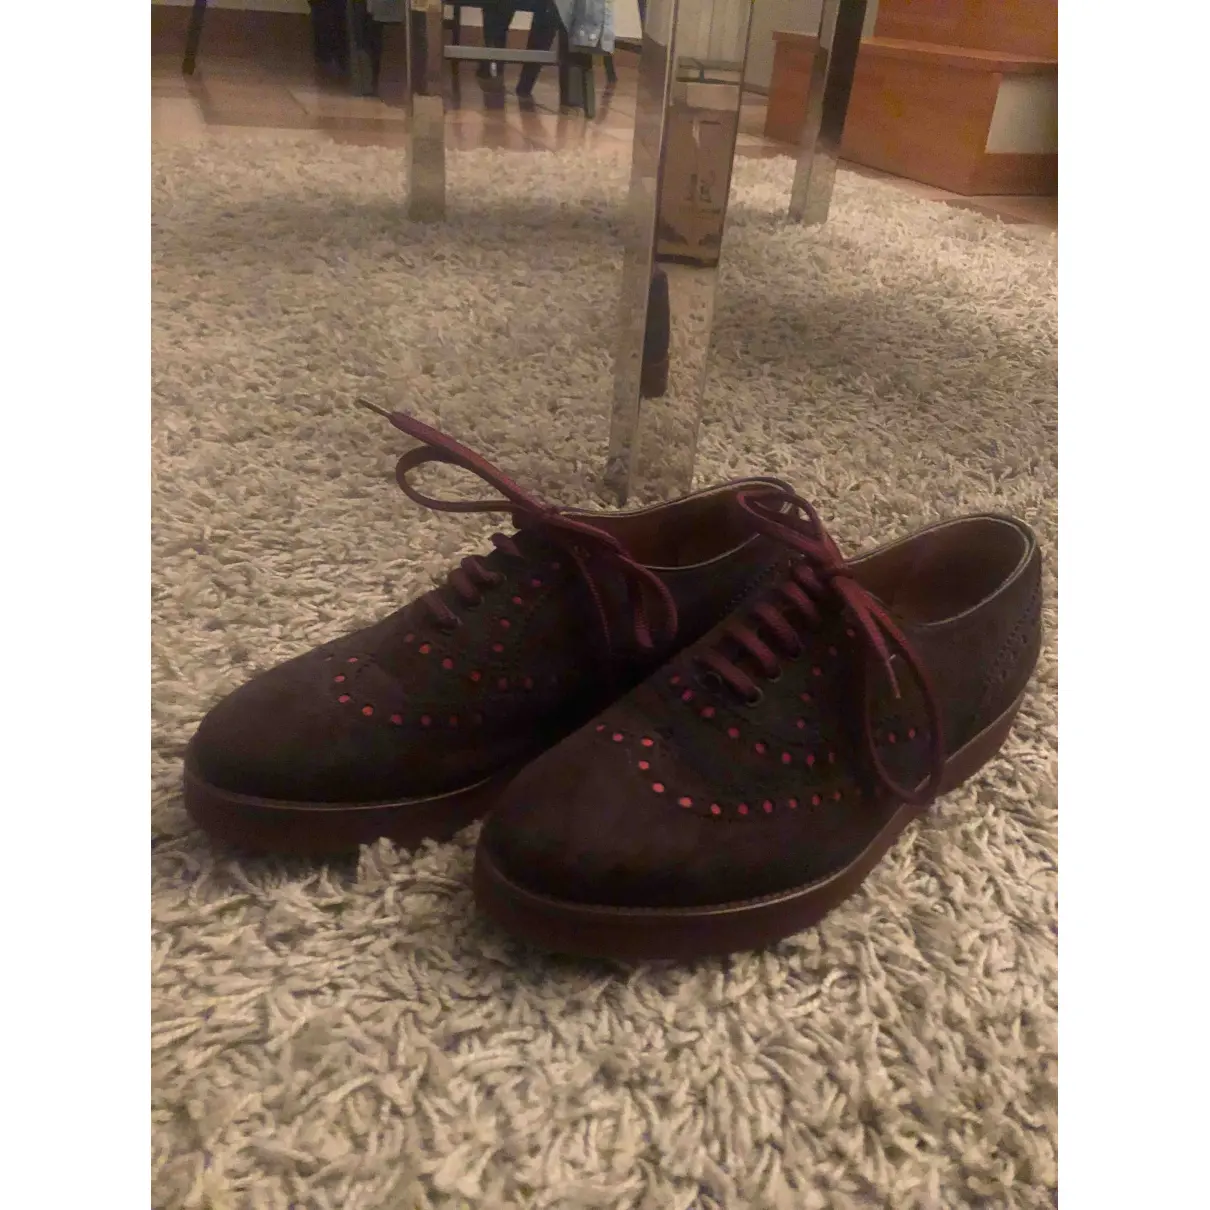 Buy Fratelli Rossetti Lace ups online